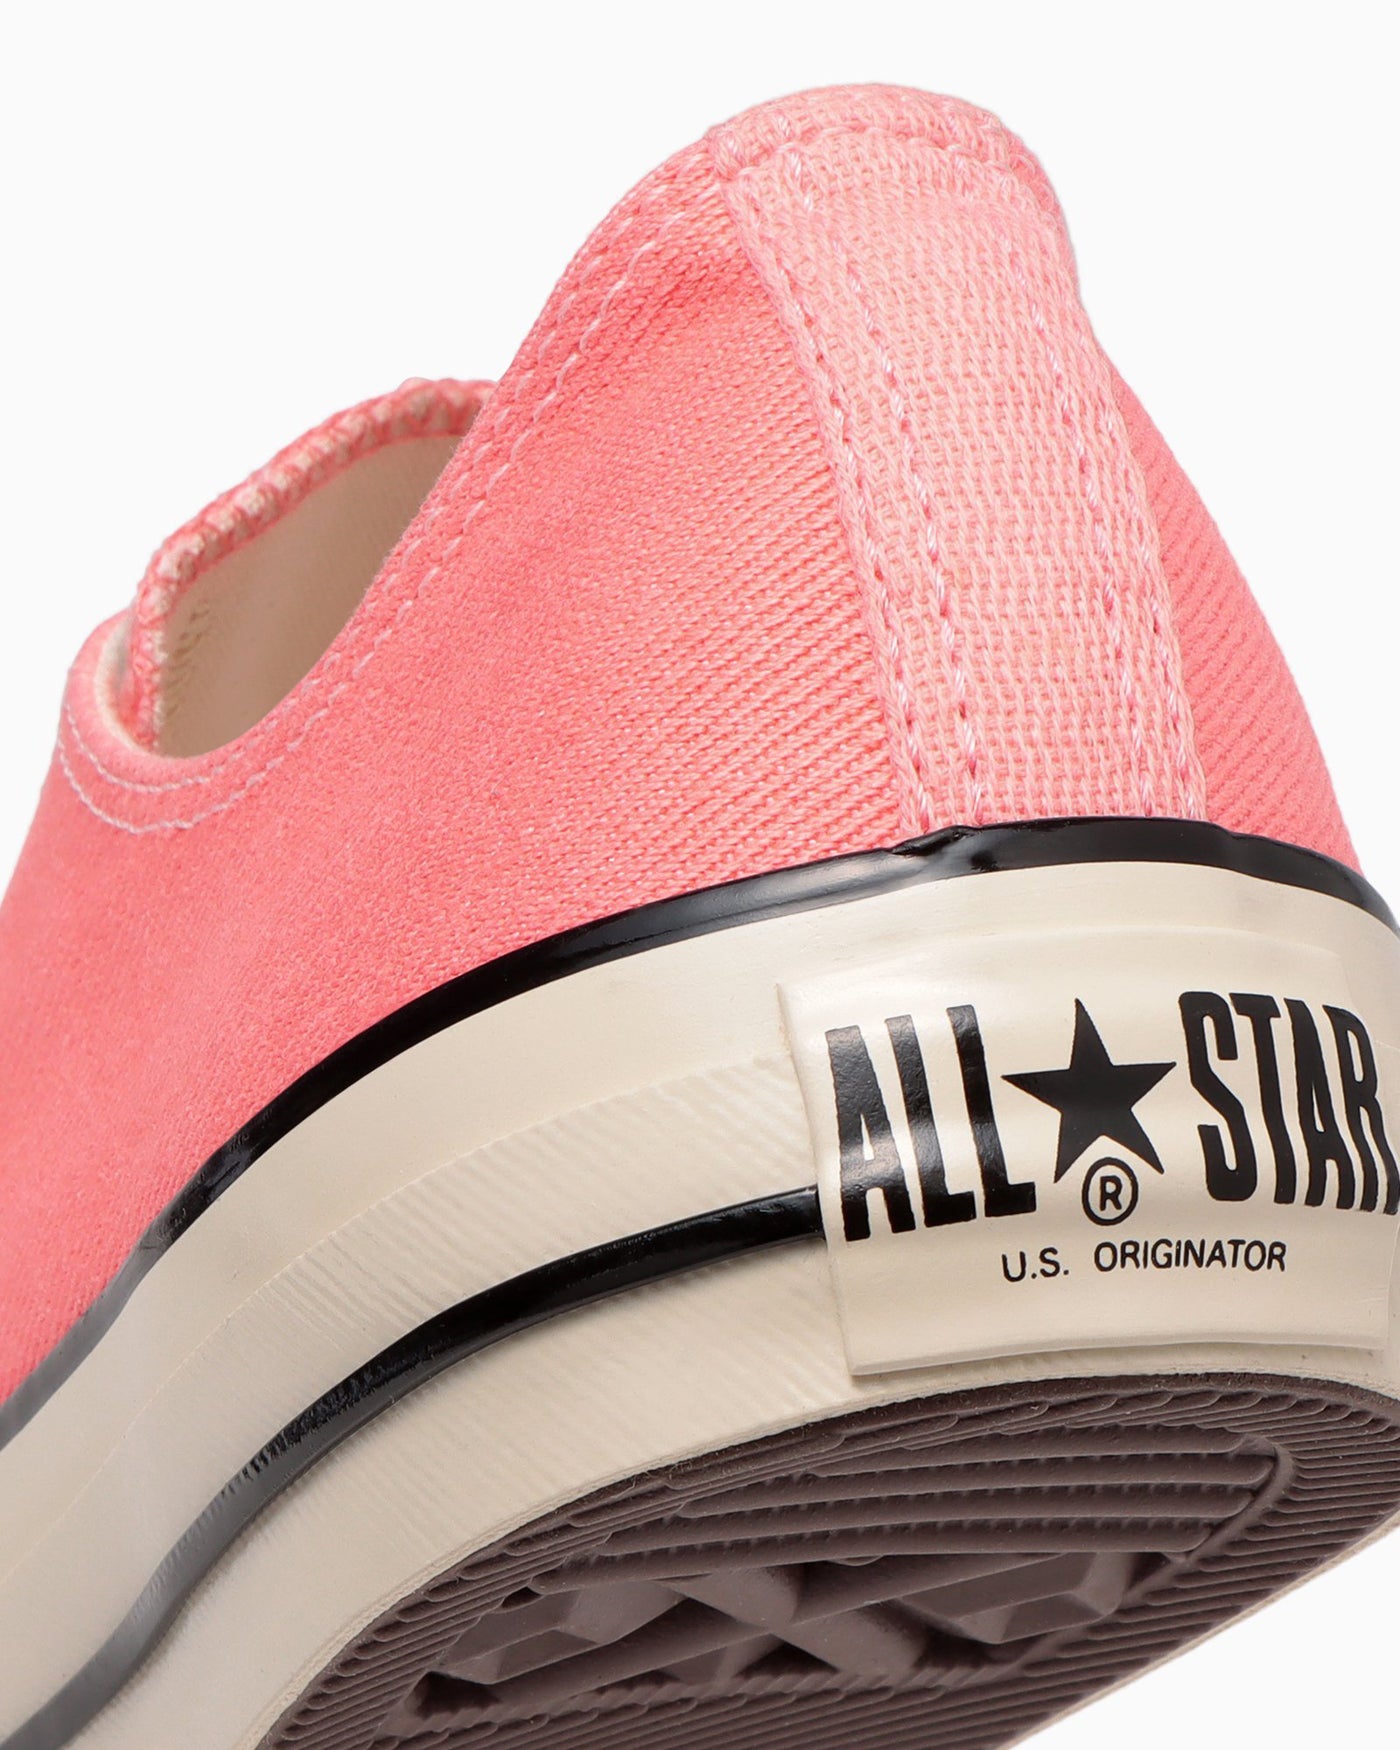 ALL STAR US COLORDENIM OX